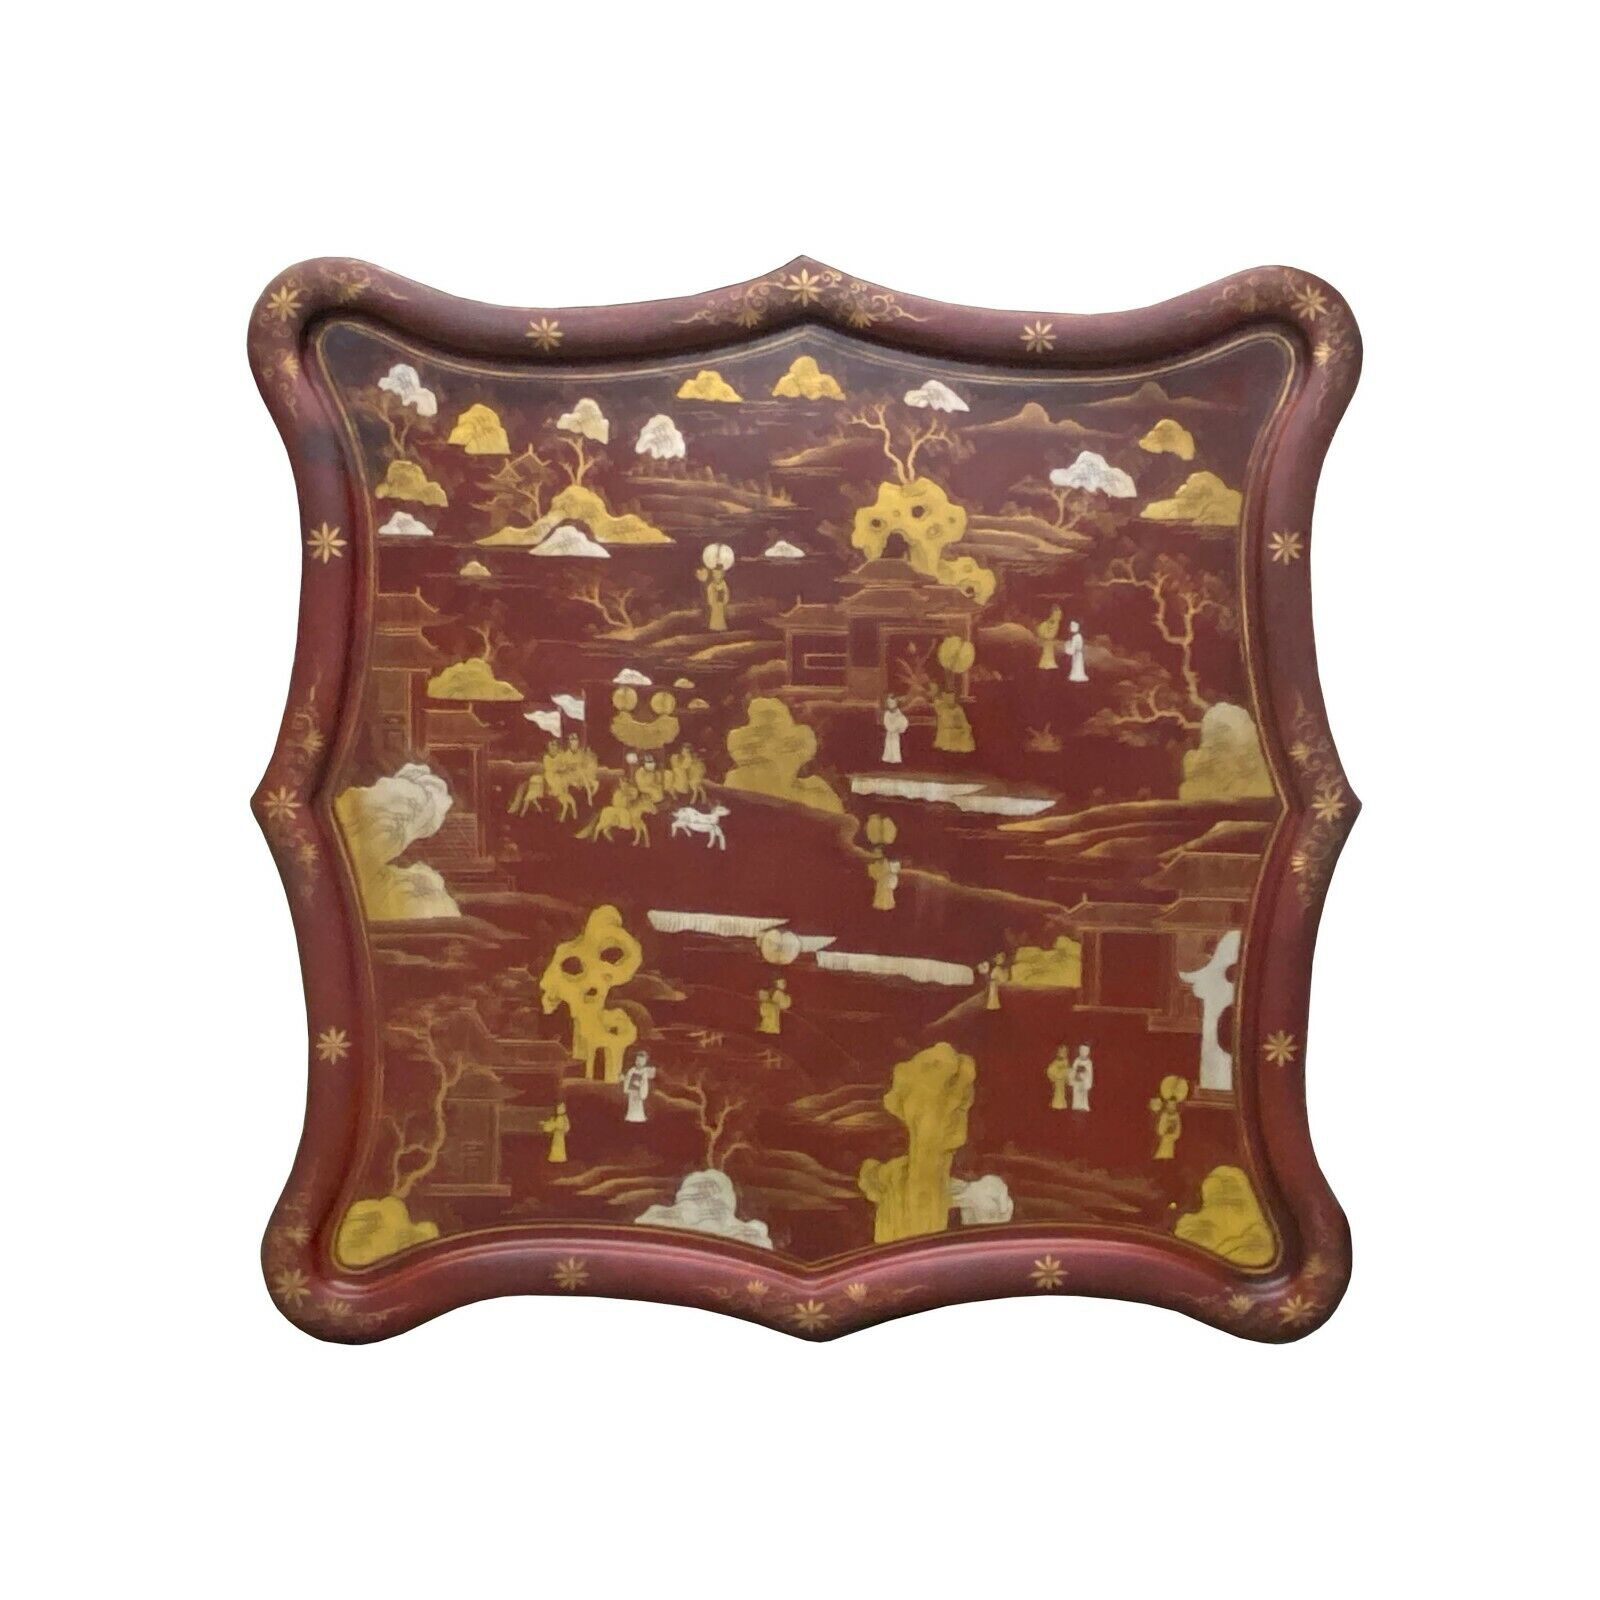 Chinese Ox Blood Red Brown Lacquer Golden Scenery Square Tray Display Art cs7213